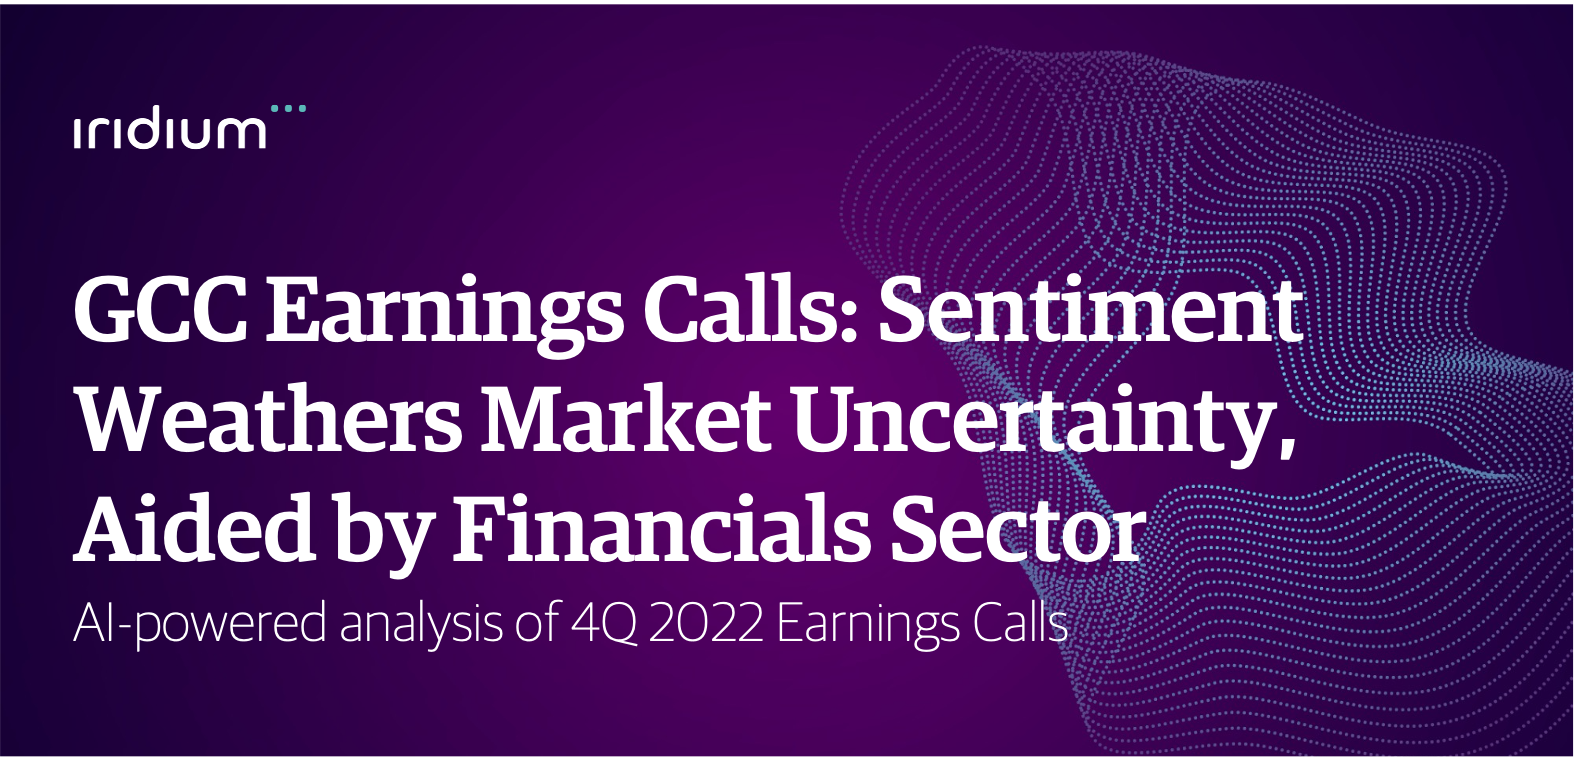 GCC Earnings Calls: Sentiment Weathers Market Uncertainty, Aided by Financials Sector